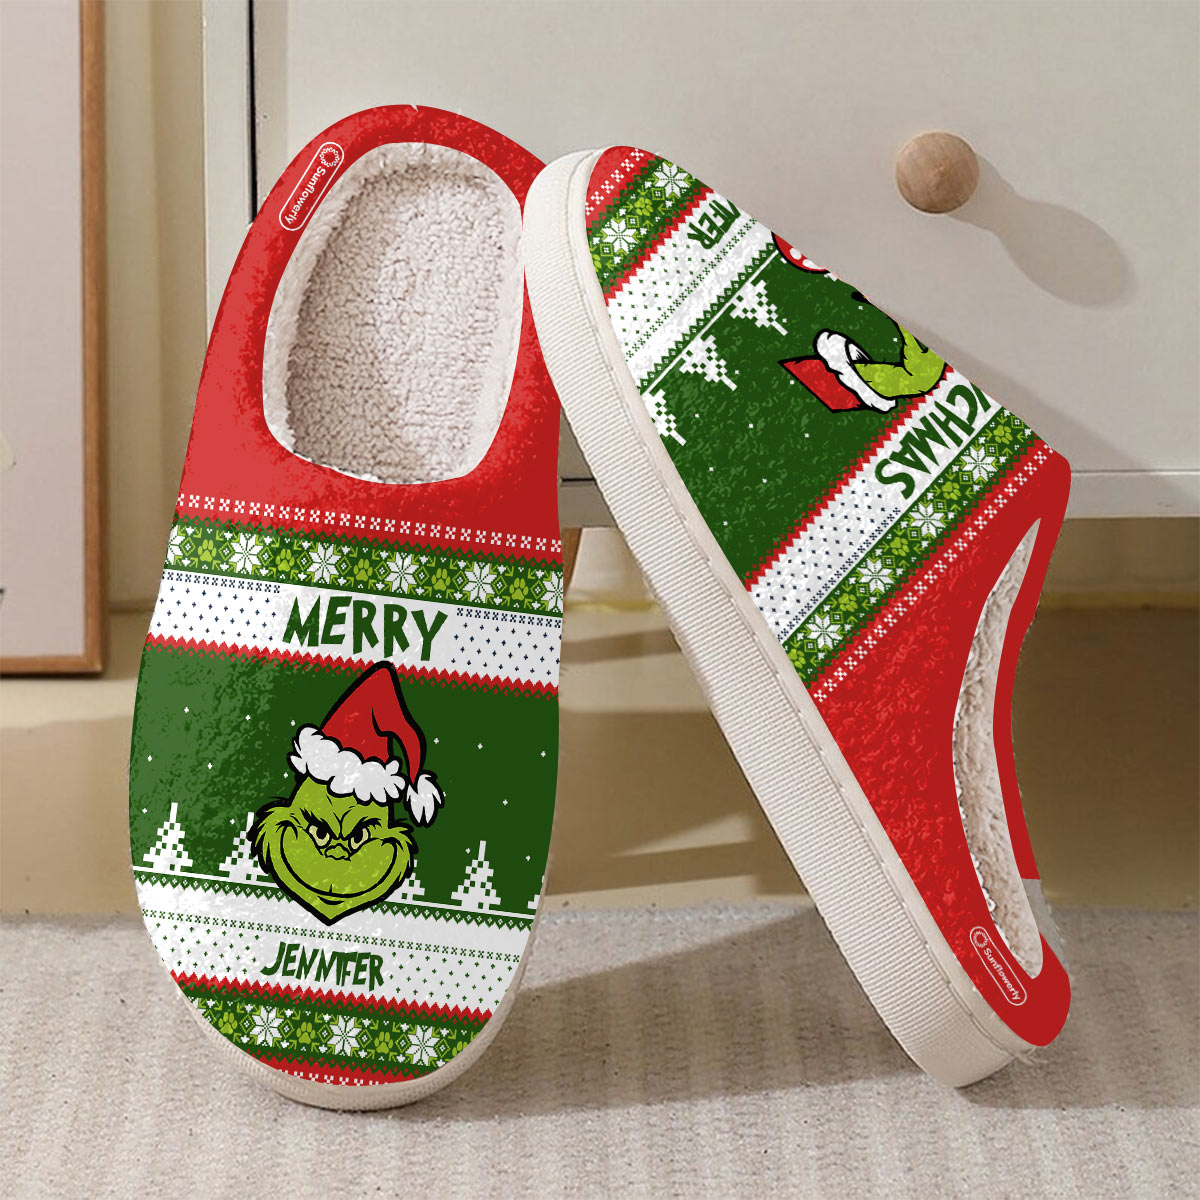 Merry Grinchmas - Personalized Stole Christmas Slippers